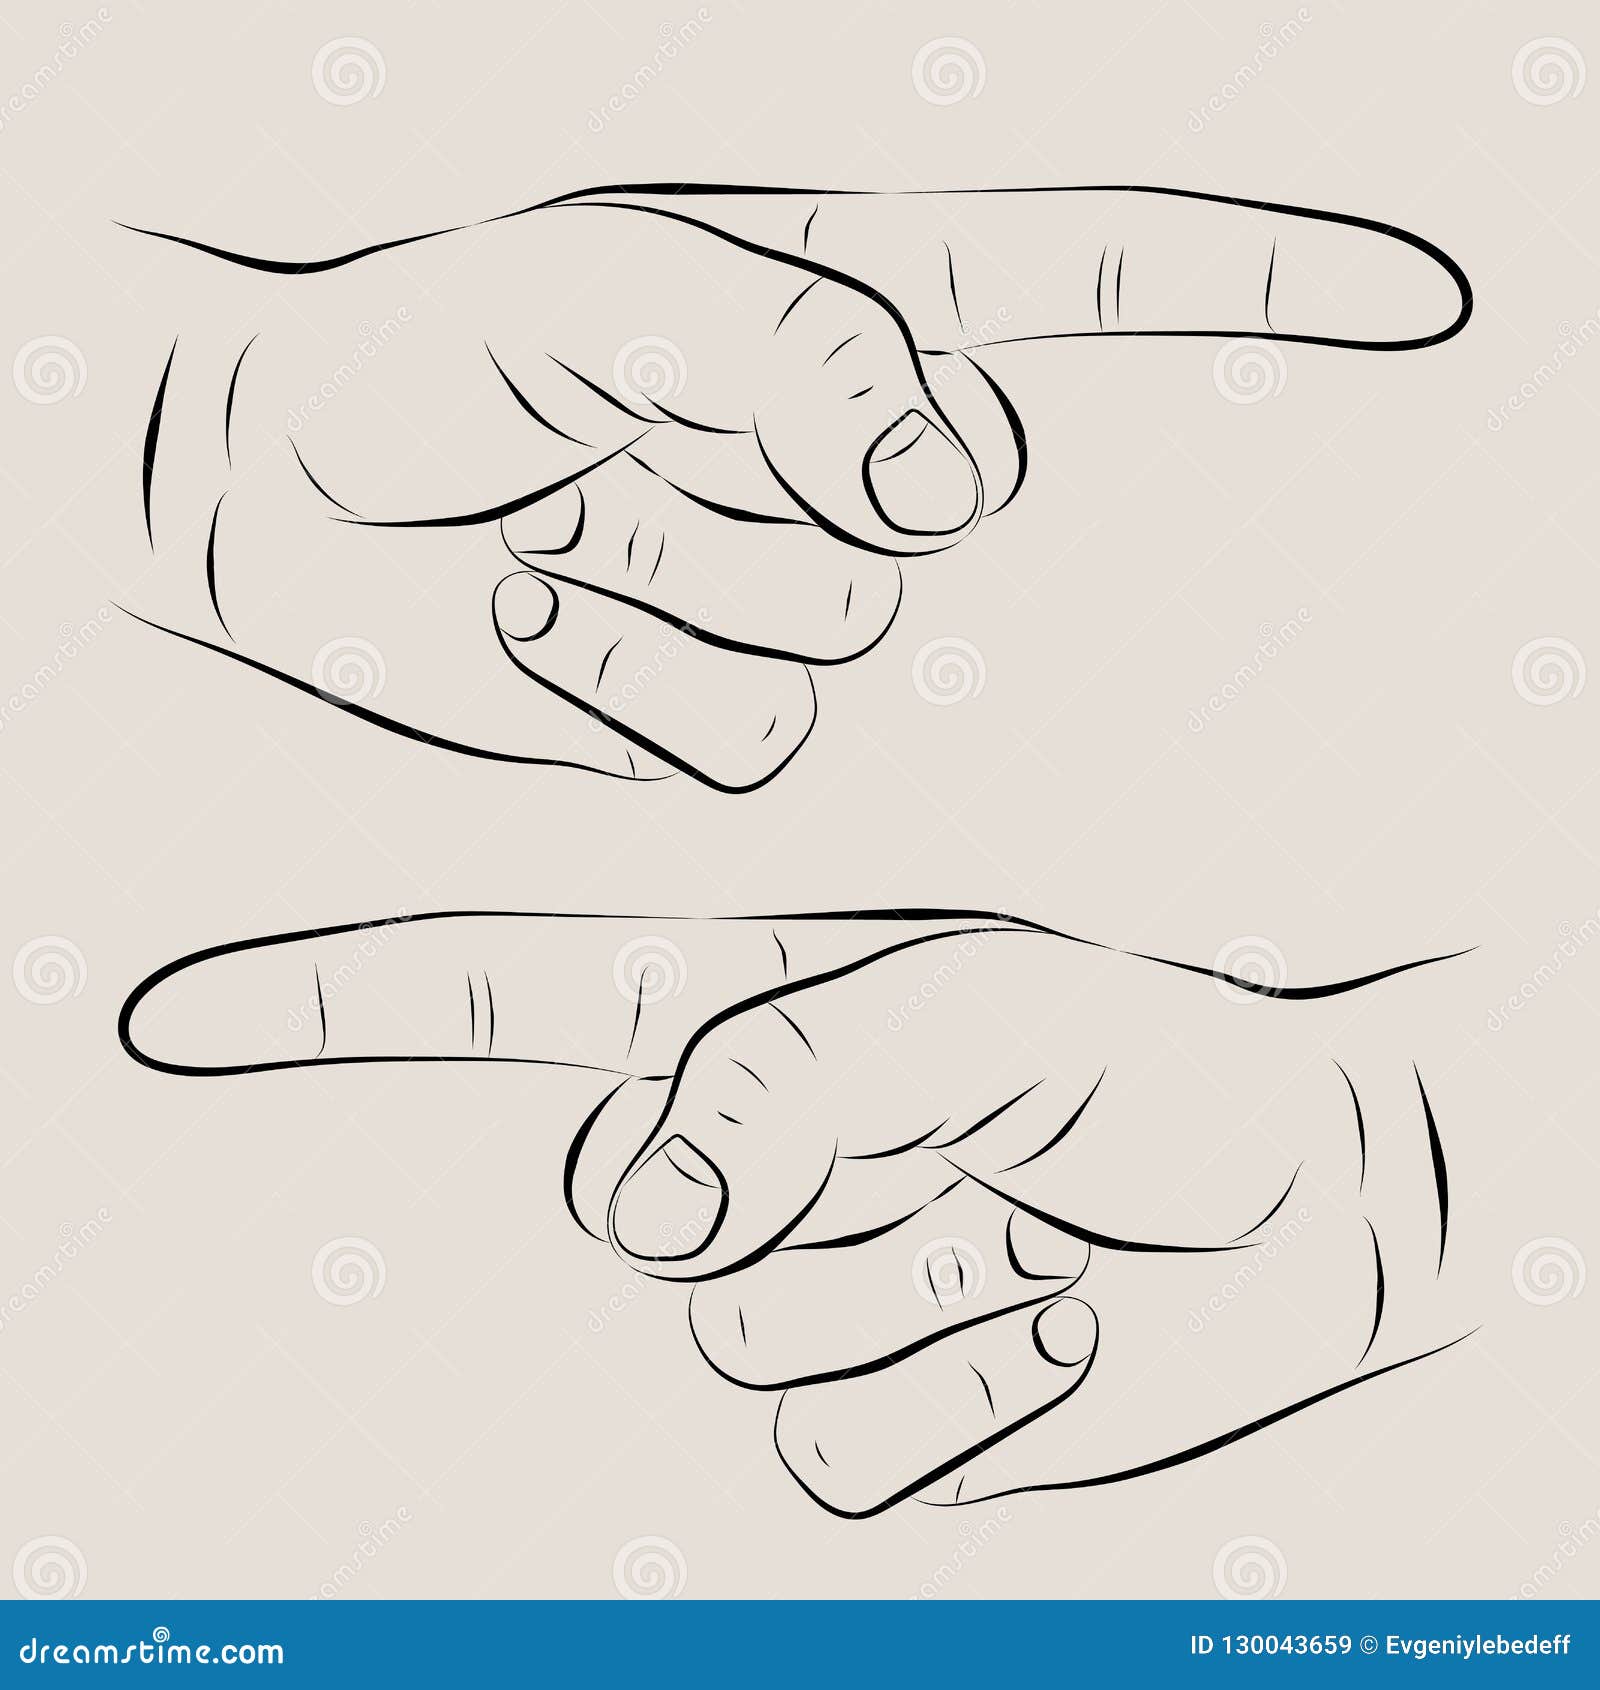 cartoon-drawing-palm-forefinger-exposed-hand-silhou-right-left-hands-finger-pointing-to-side-silhouette-outline-130043659.jpg